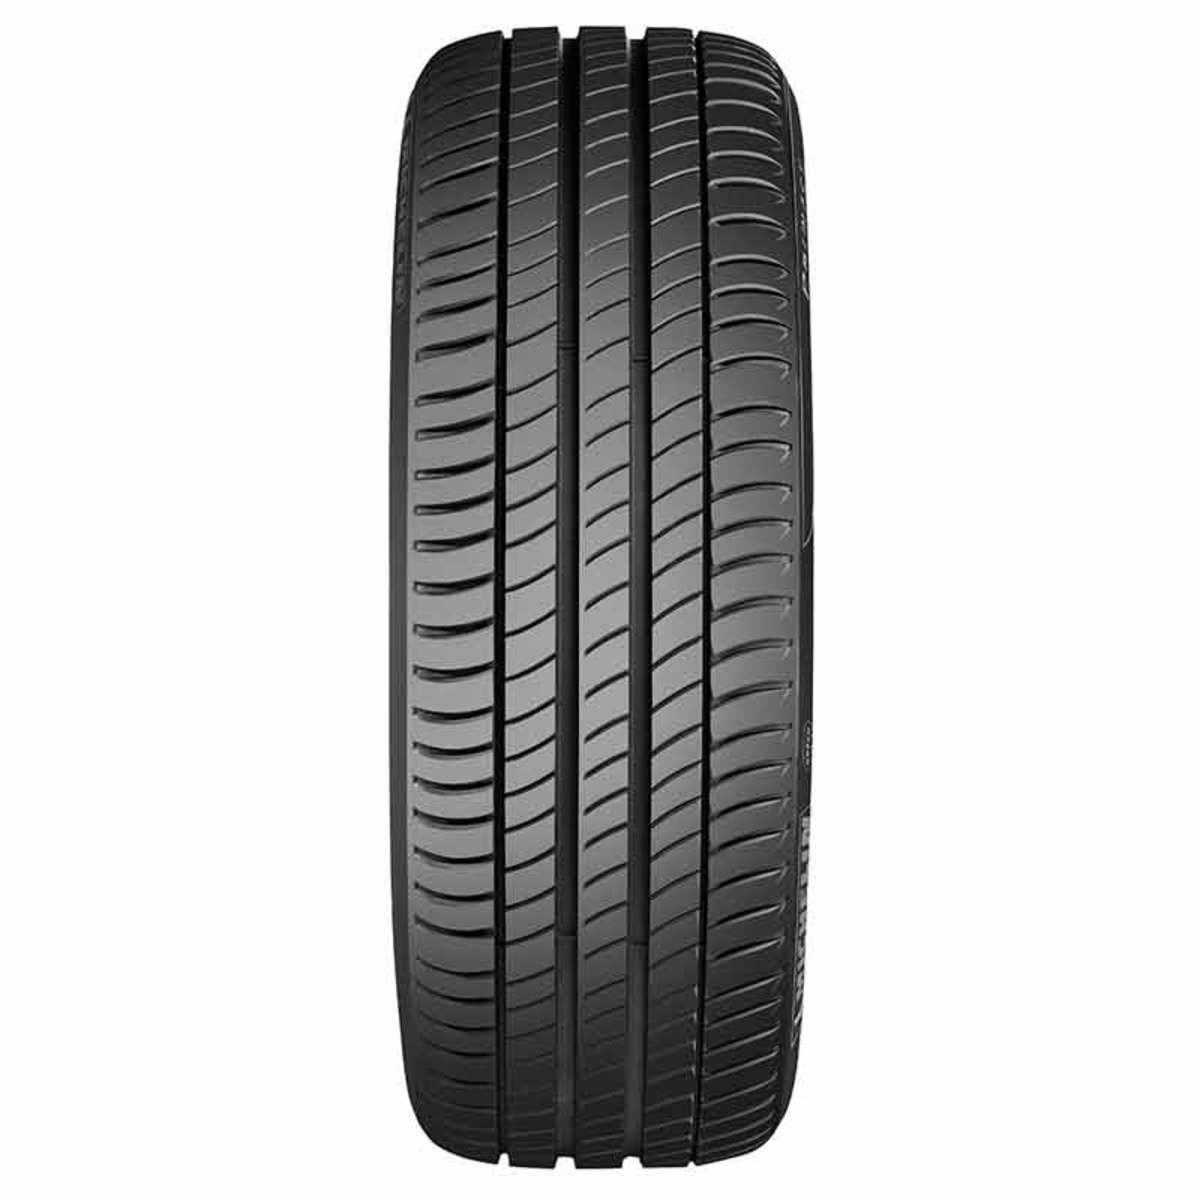 Michelin 185/55 R16 87 (H) PRIMACY 3 Extra Load (XL)